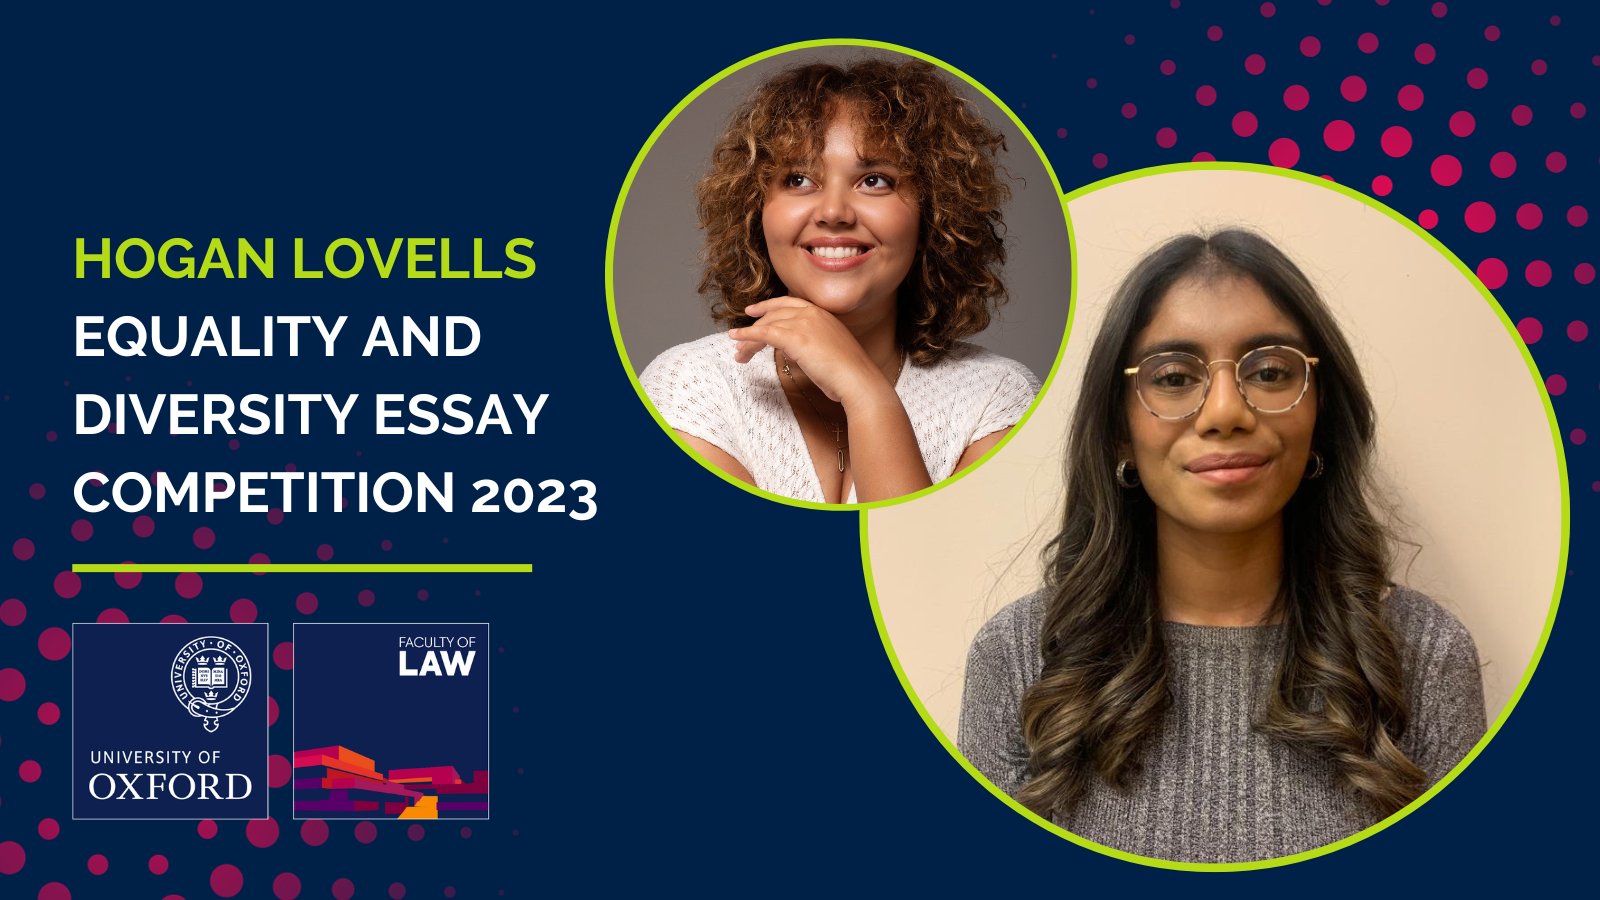 Hogan Lovells Equality and Diversity Essay Competition Winners 2023